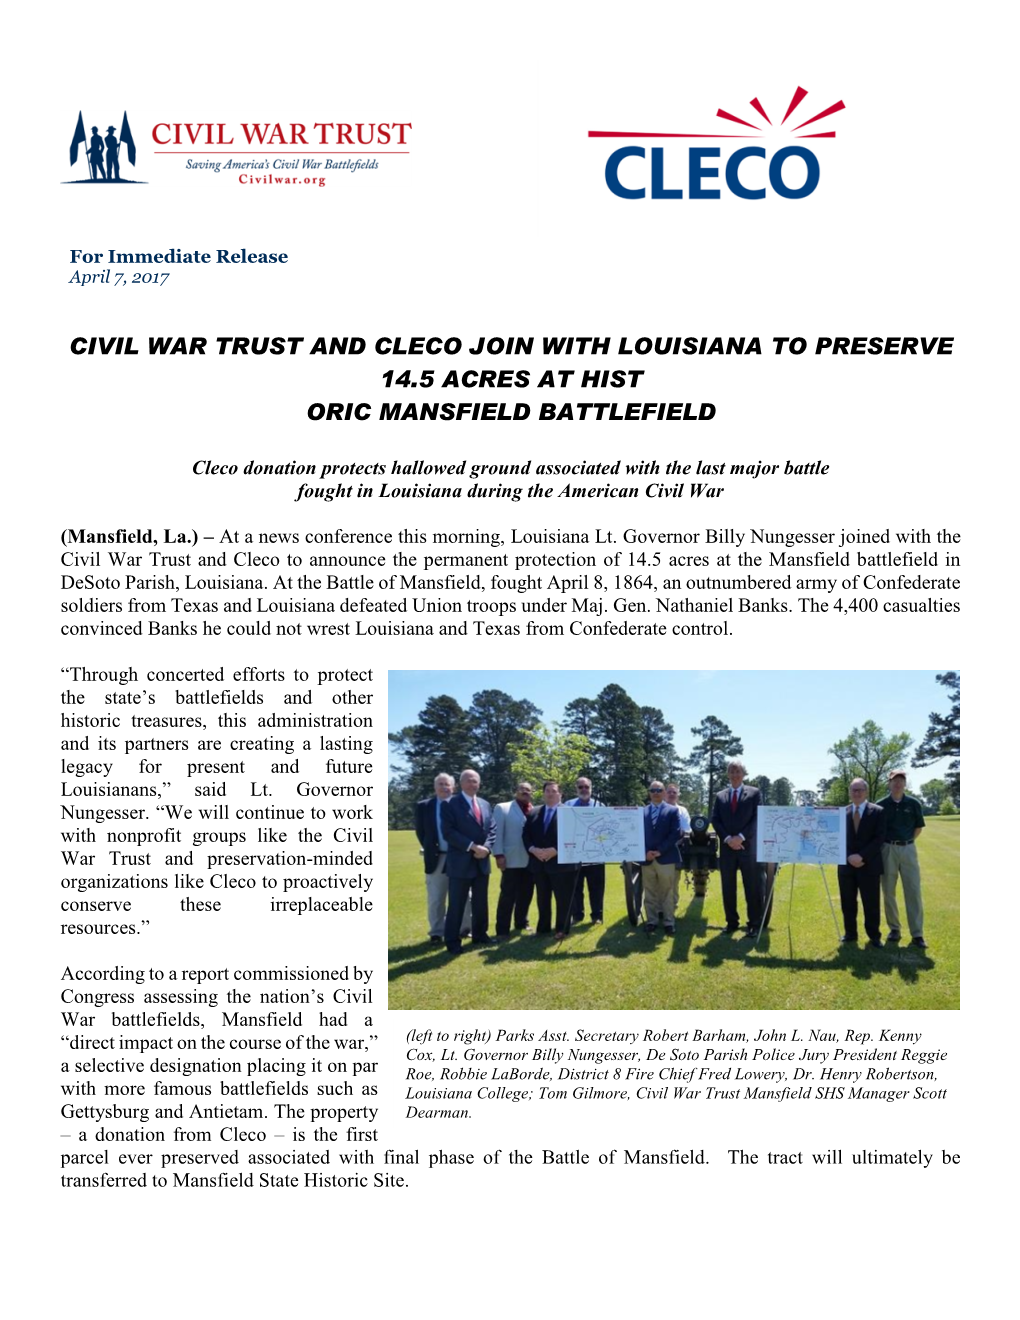 Civil War Trust and Cleco Join with Louisiana to Preserve Land At